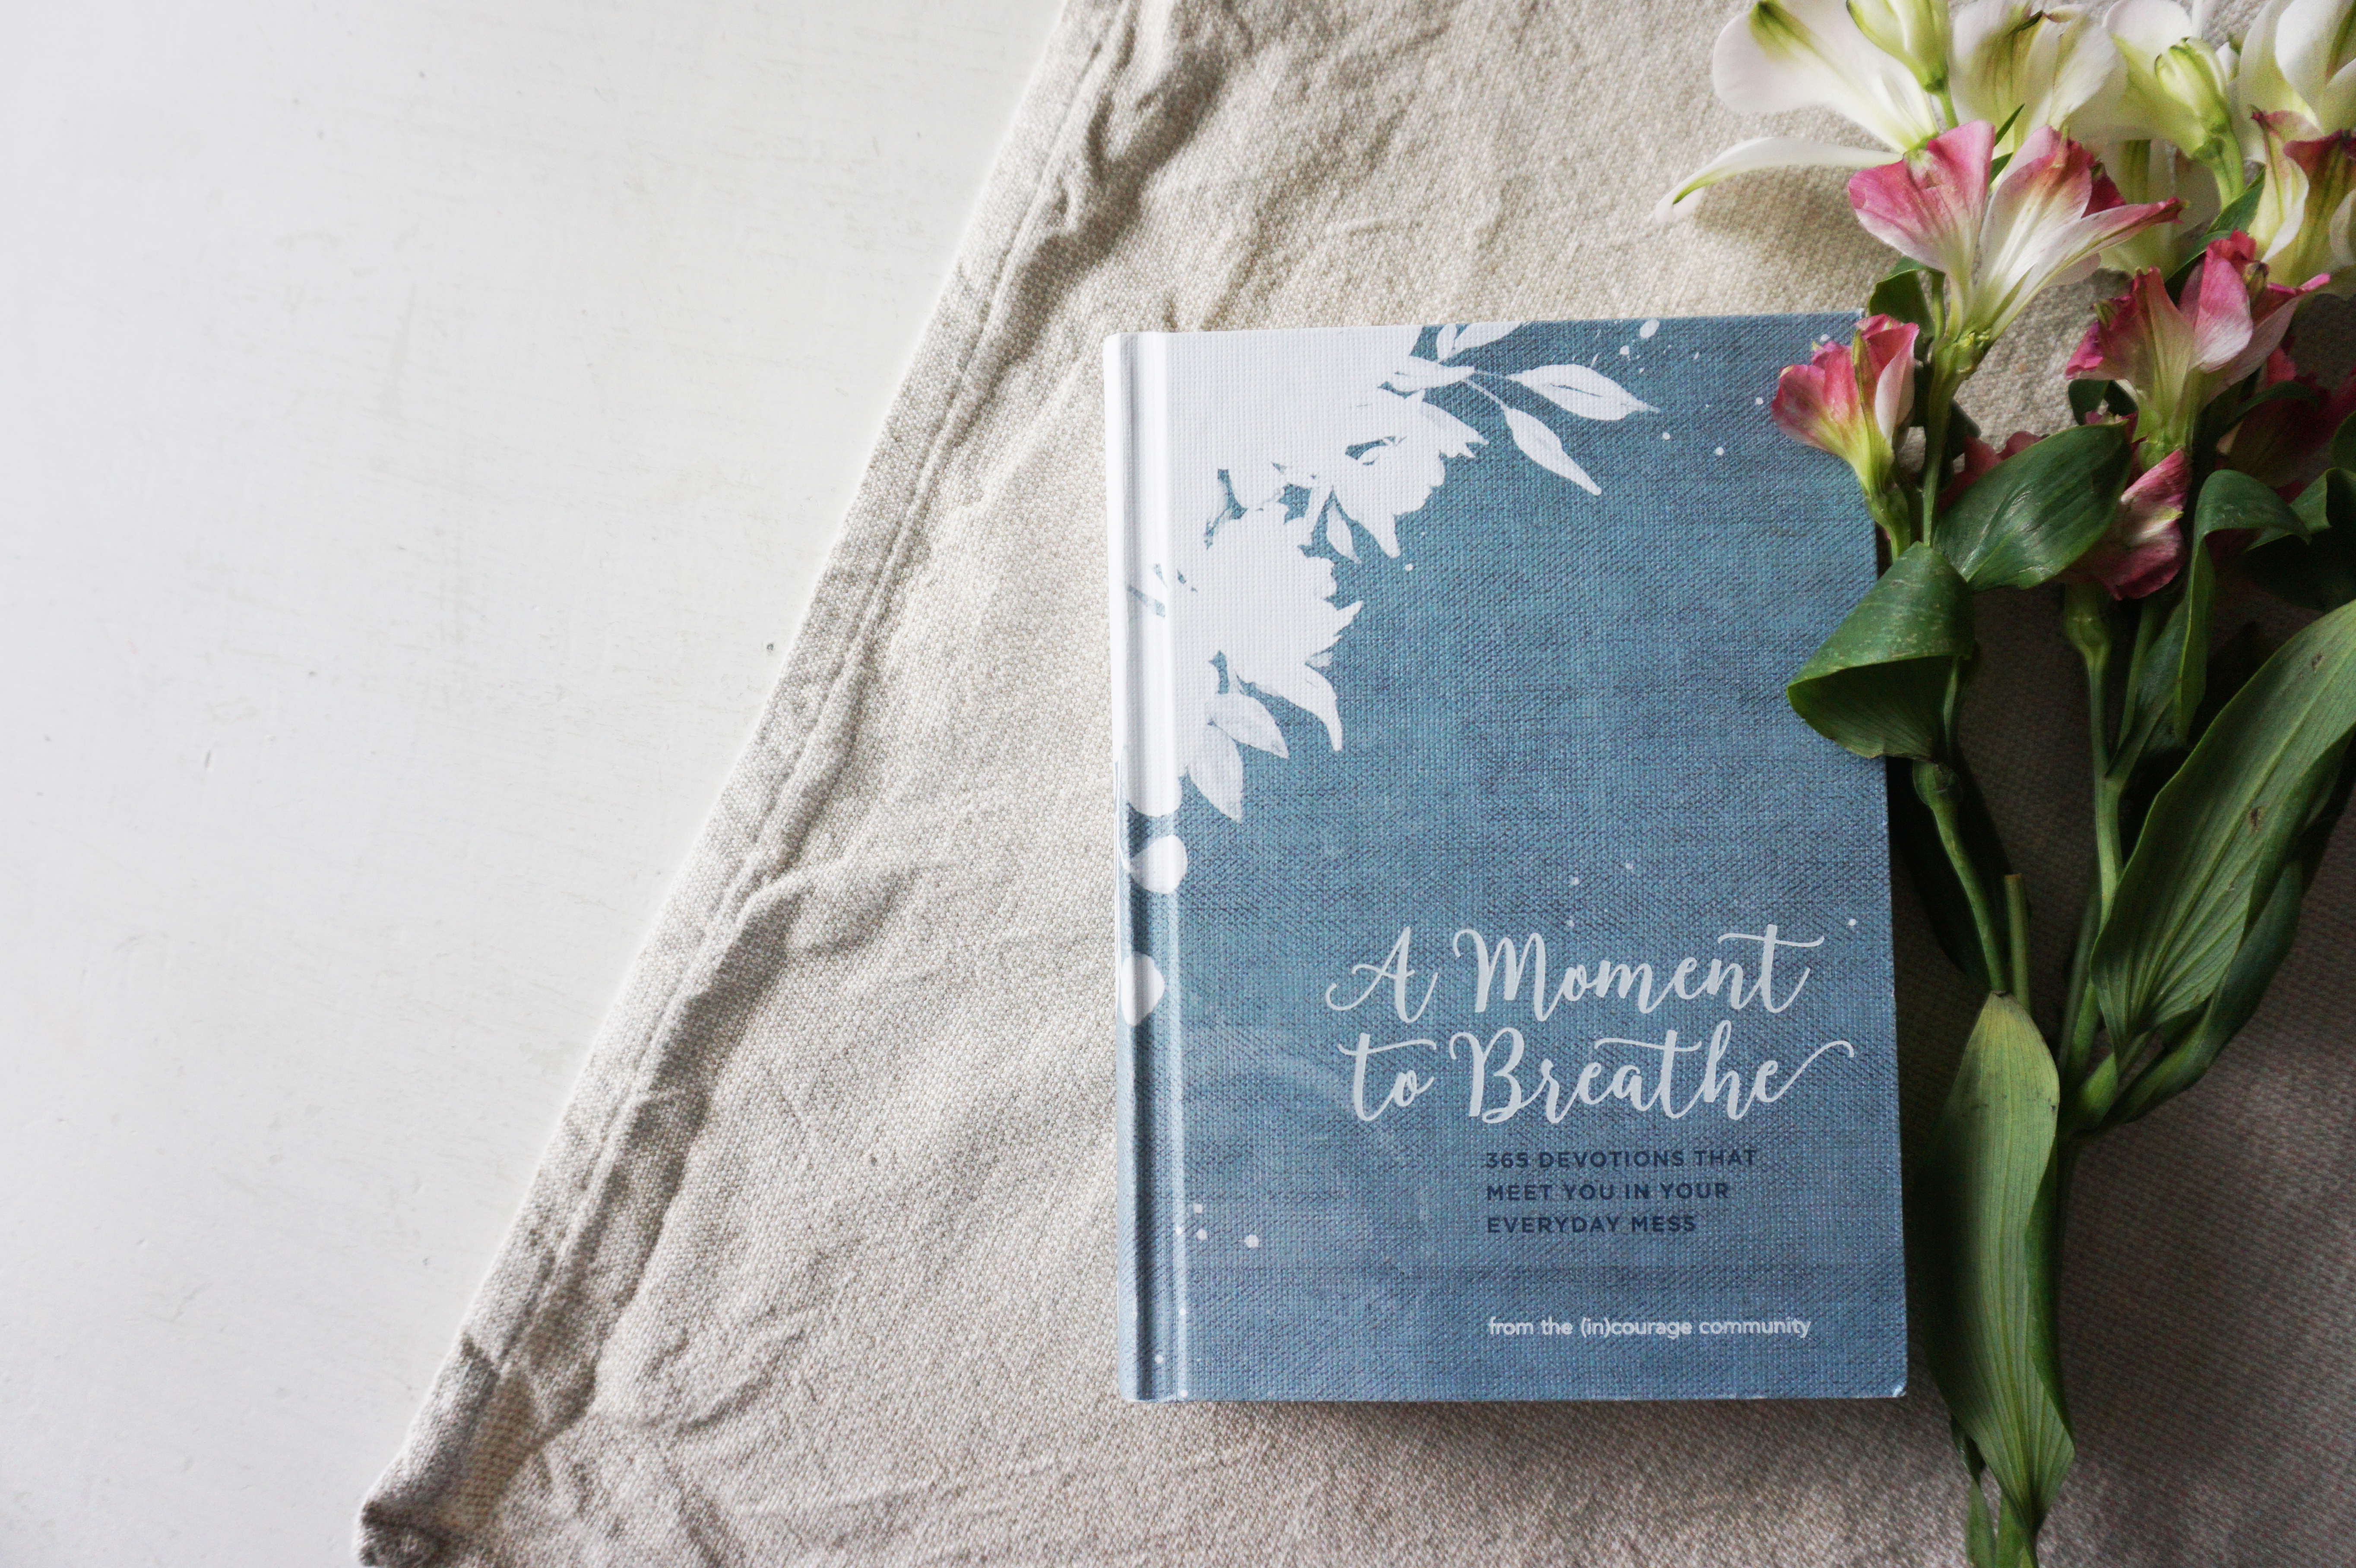 Do You Need a Moment to Breathe? BOOK GIVEAWAY DAY!!!